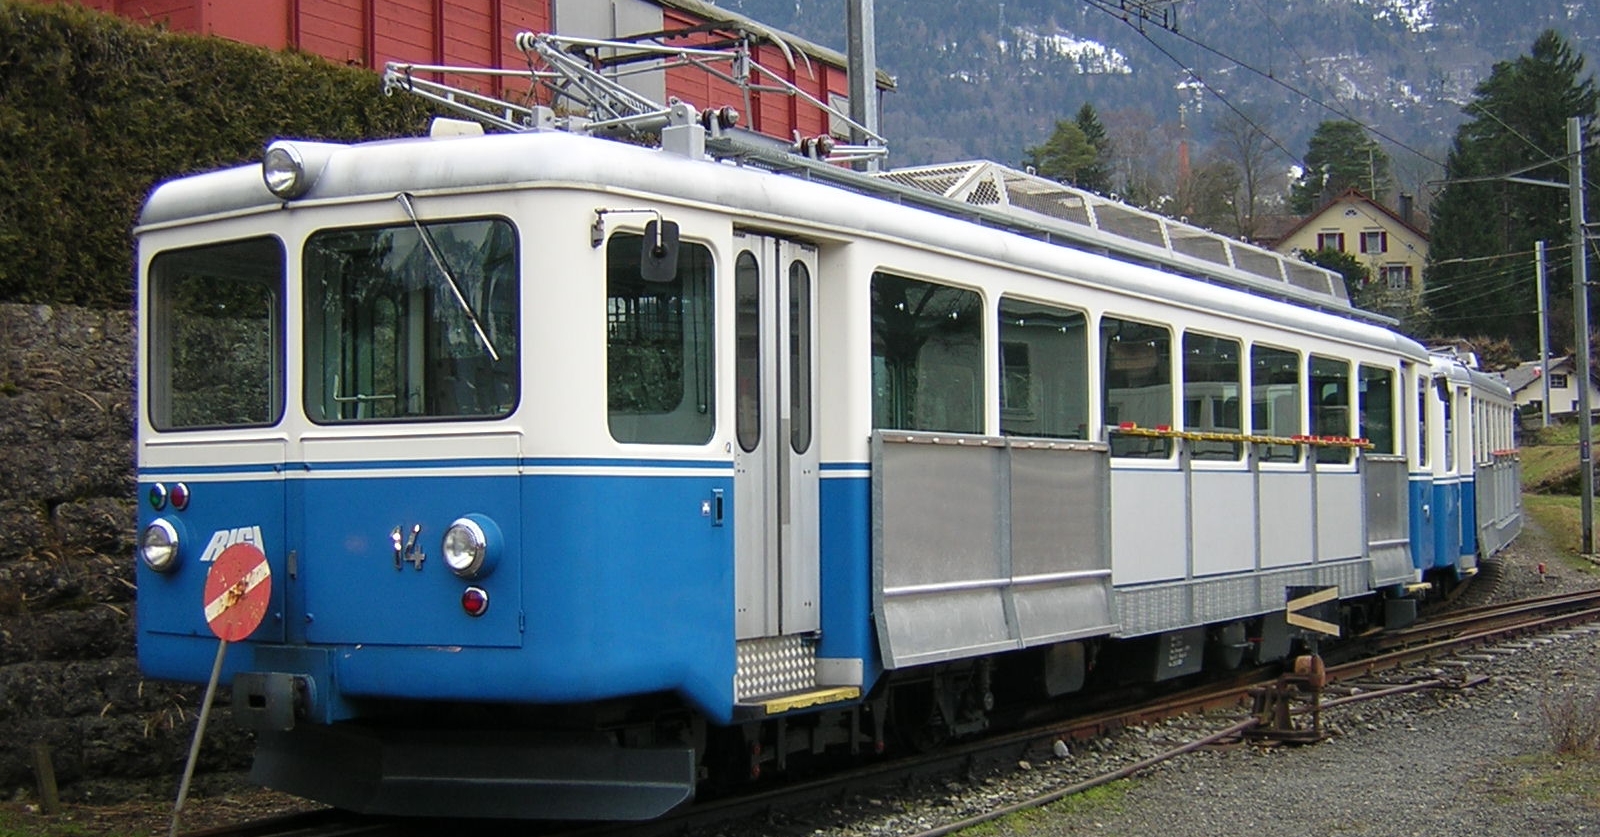 BDhe 2/4 14 with ski mounts shortly before repainting in 2005